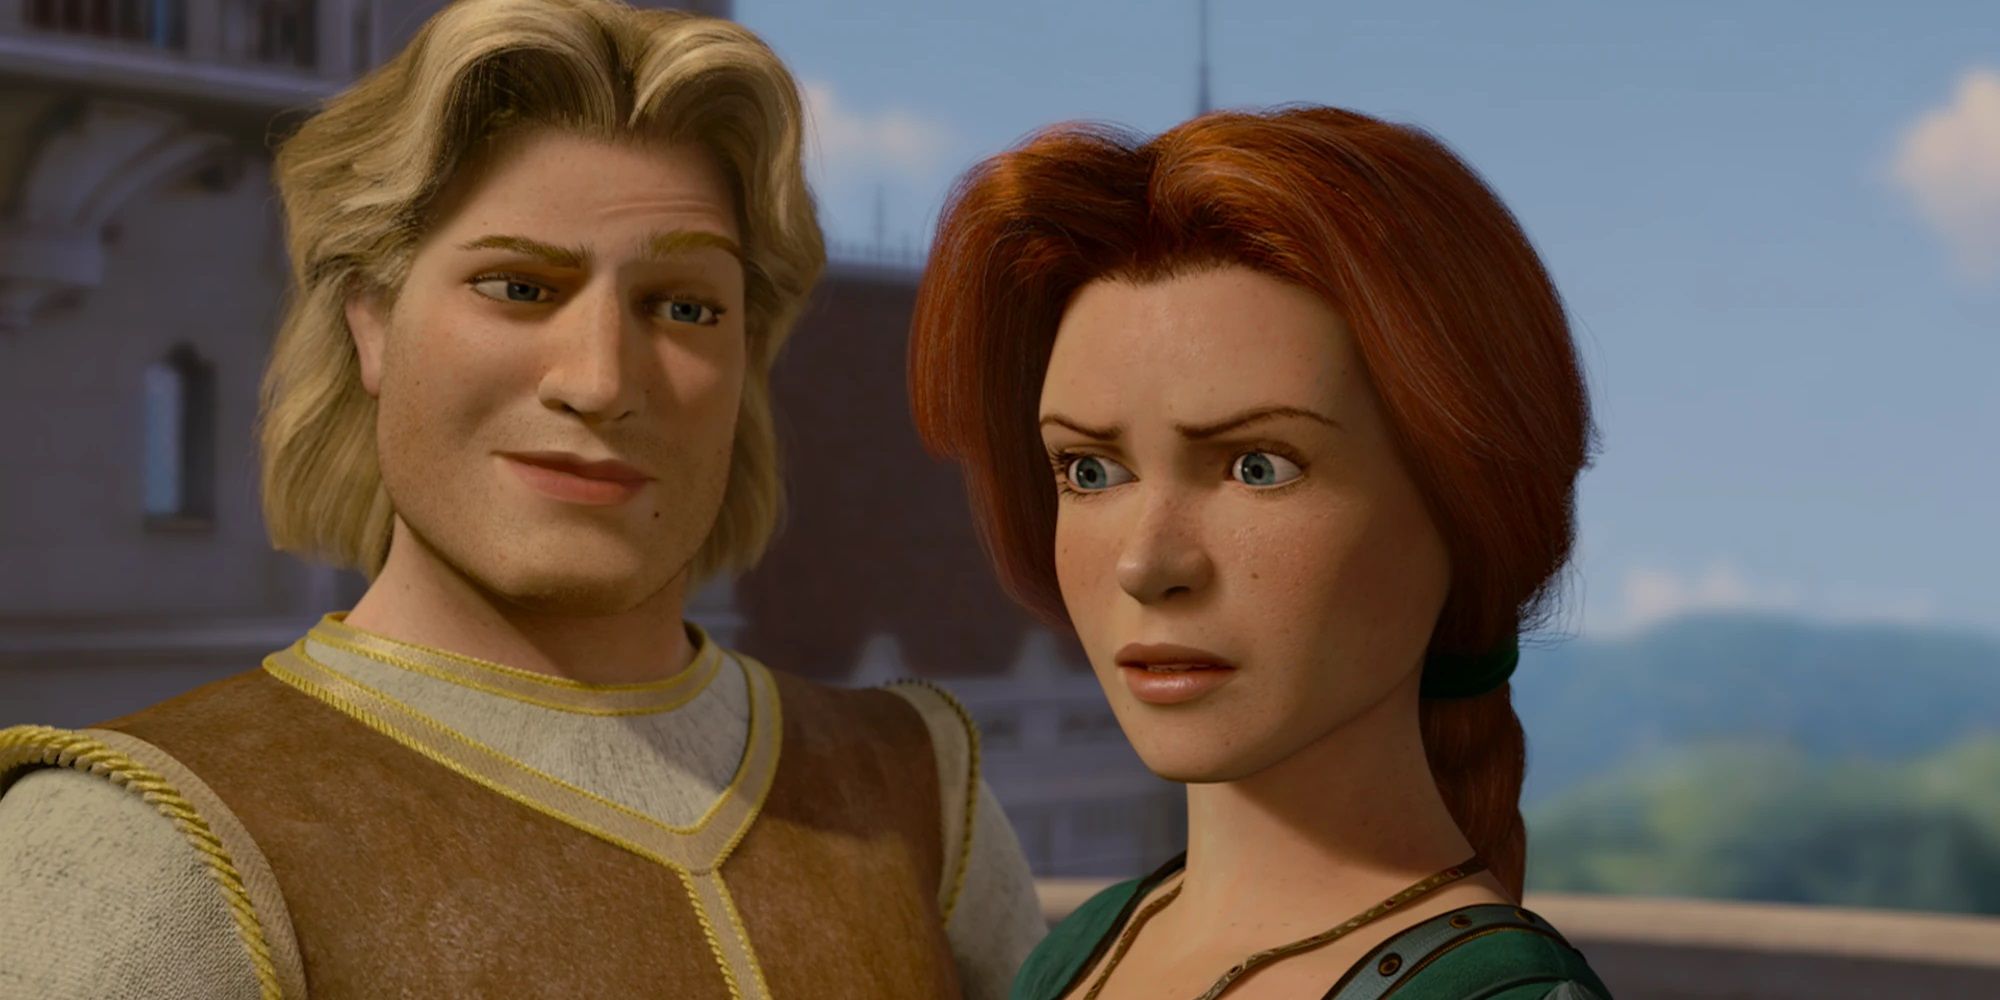 Prince Charming and Fiona in the castle in Shrek 2